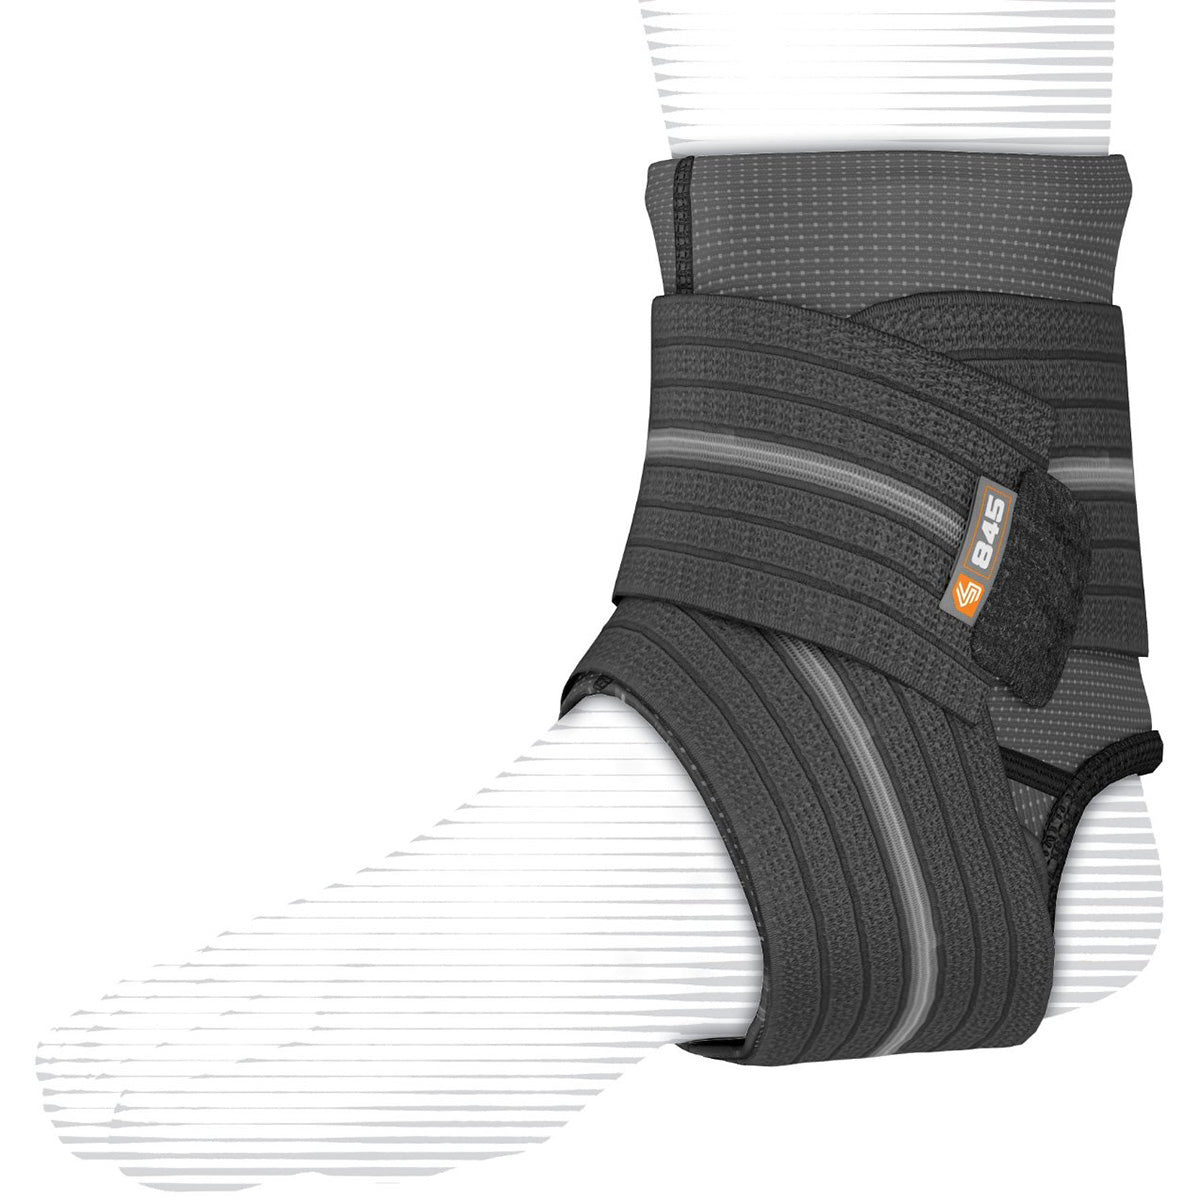 Shock Doctor Ankle Sleeve with Compression Wrap Support - Black Shock Doctor